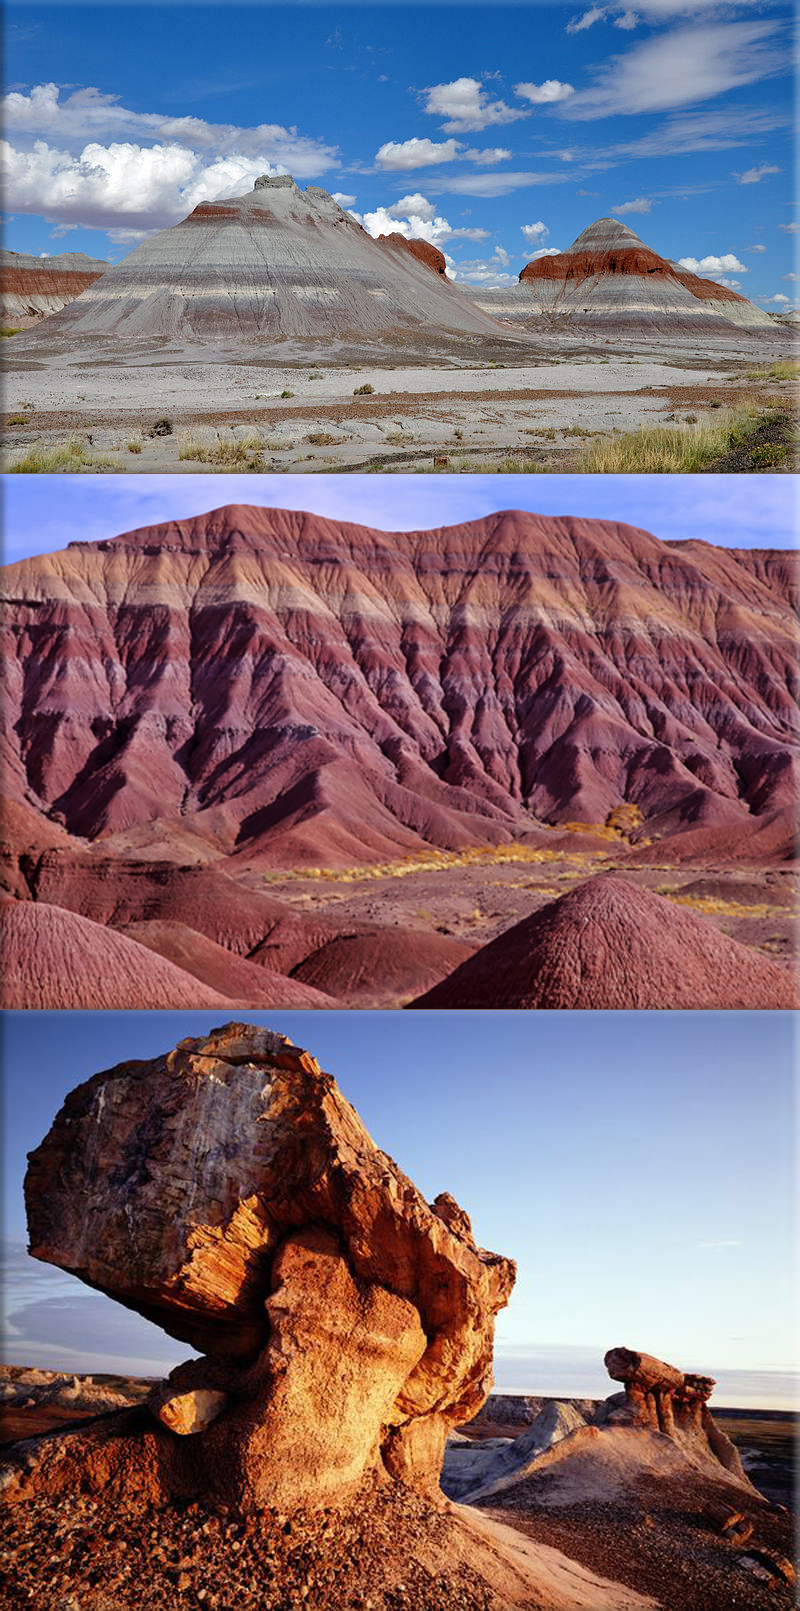 Petrified Forest National Park is established in Arizona